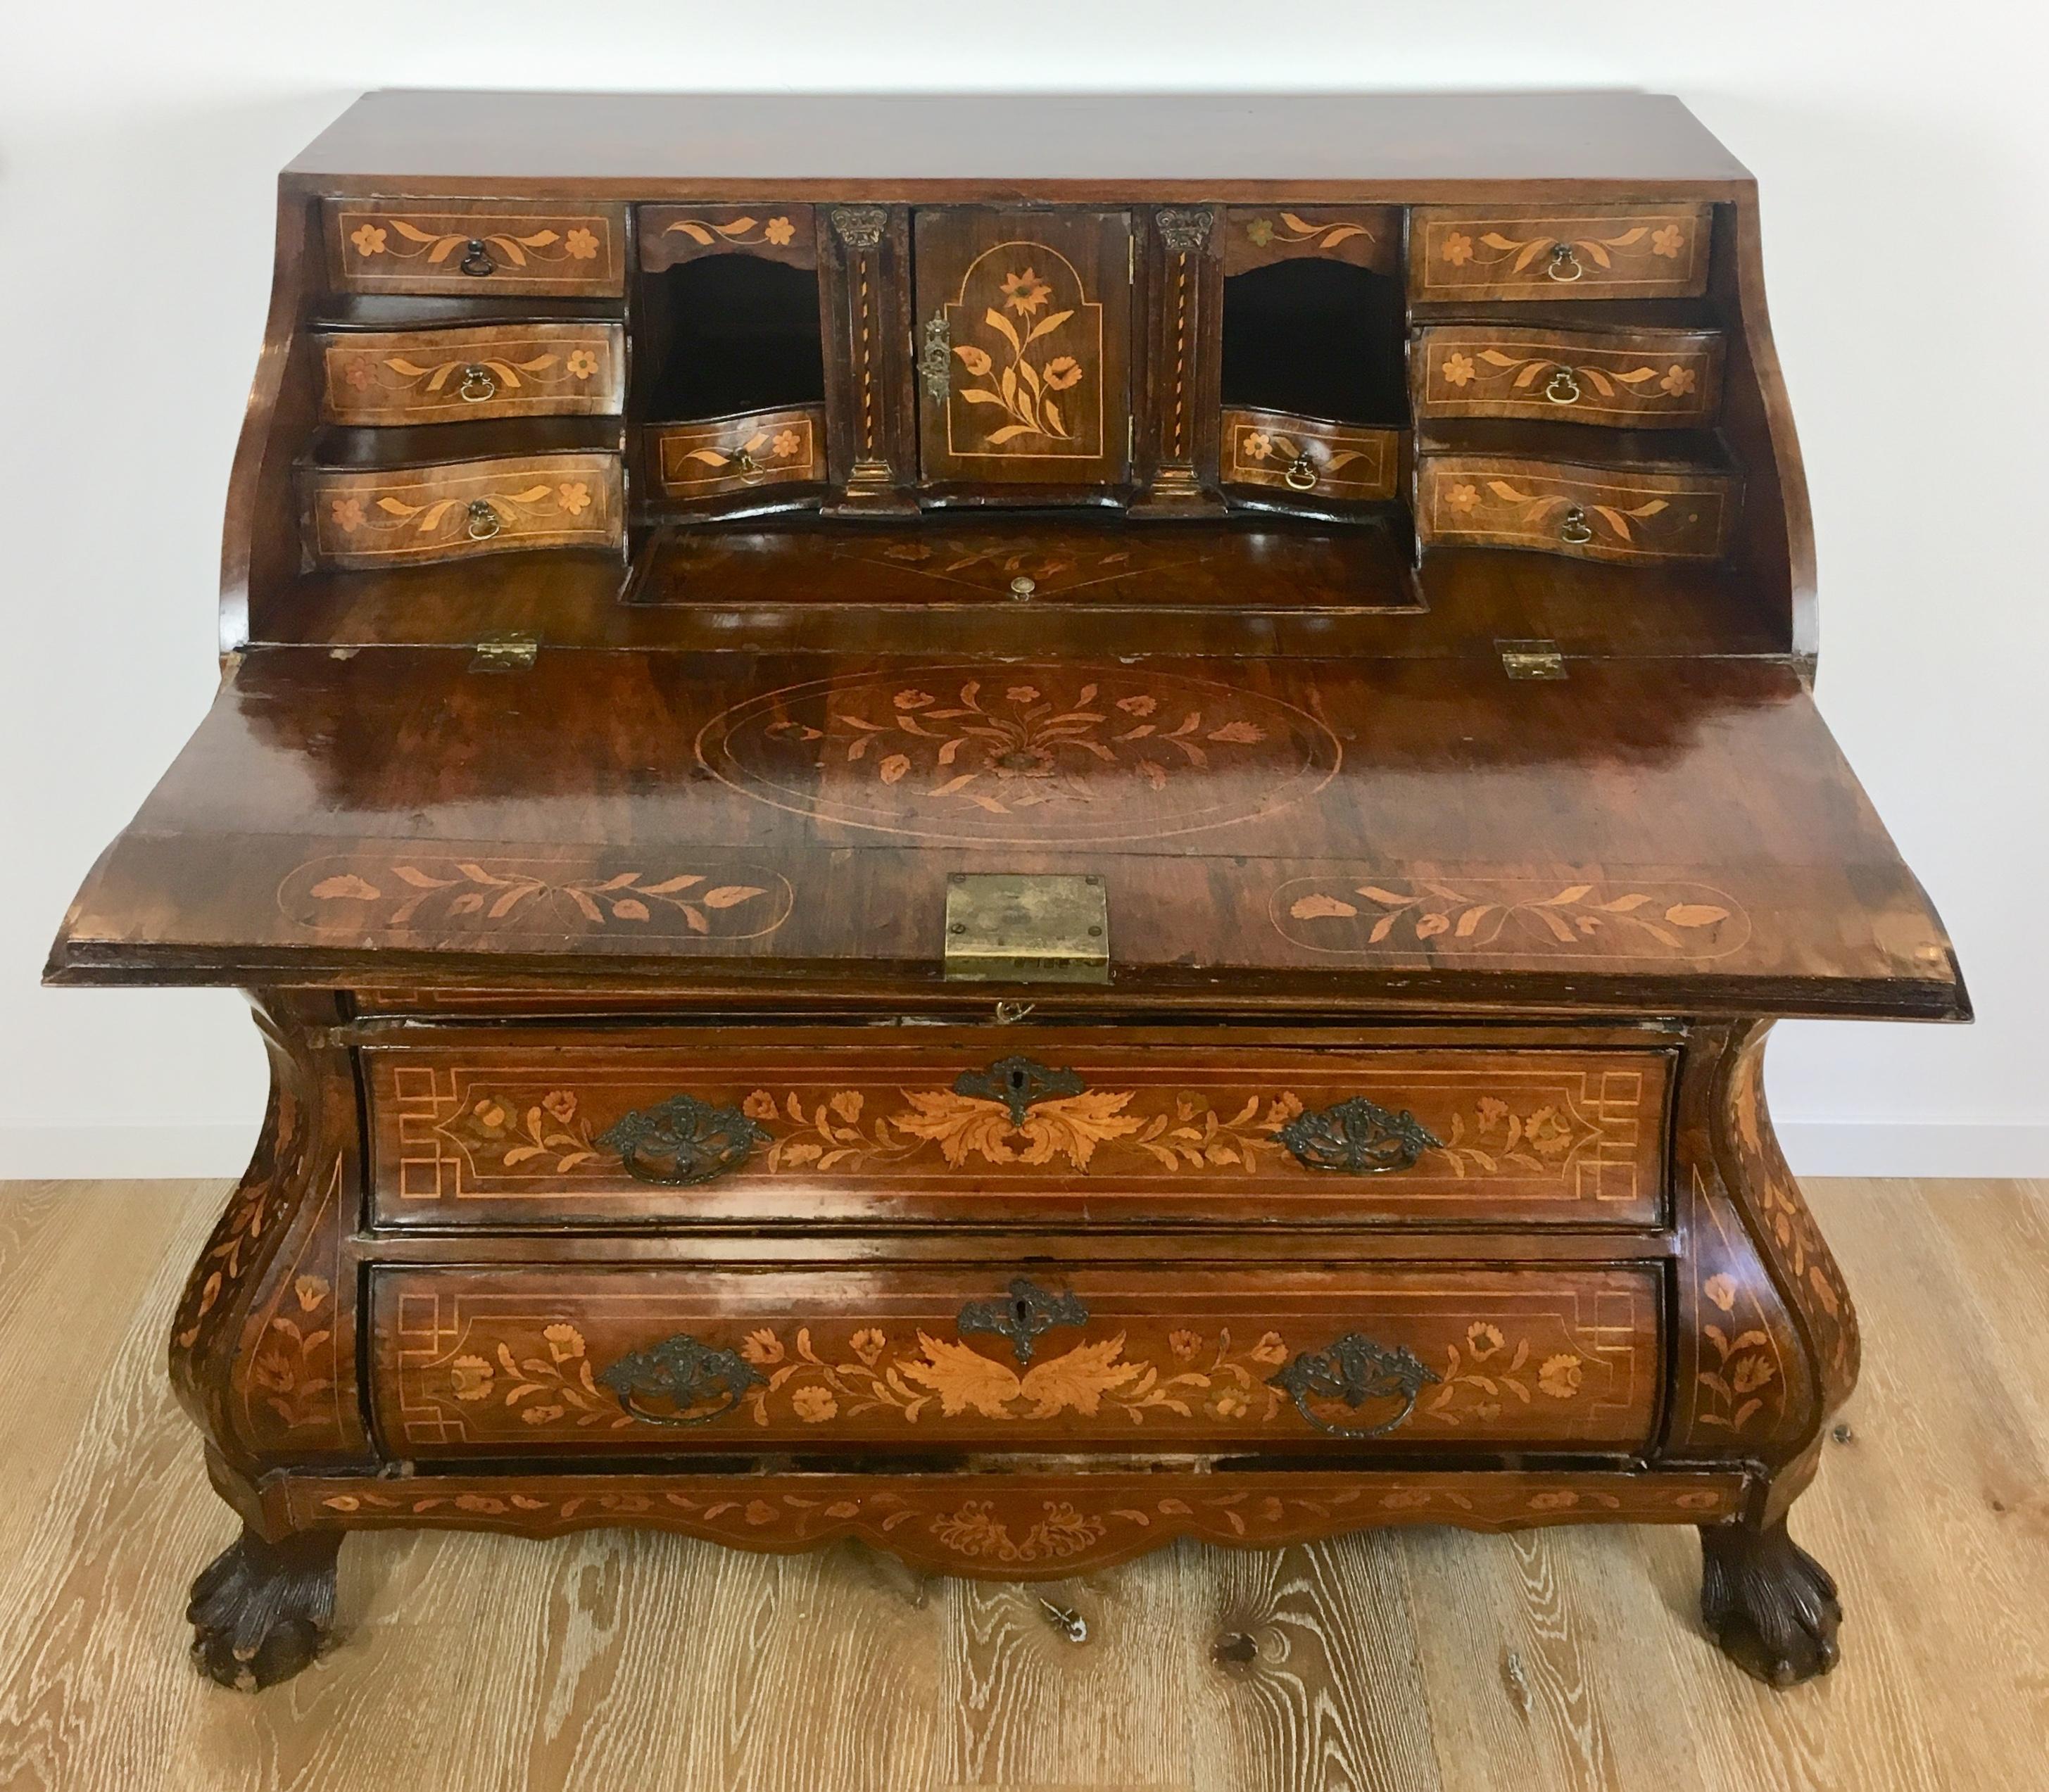 A fine 18th century Dutch scriban, secretary or commode, from Holland. 
Top lid, sides and front inlaid with flowers, urns of flowers and trailing vines. Three drawers with slant lid which opens to reveal a wonderful interior including eight drawers